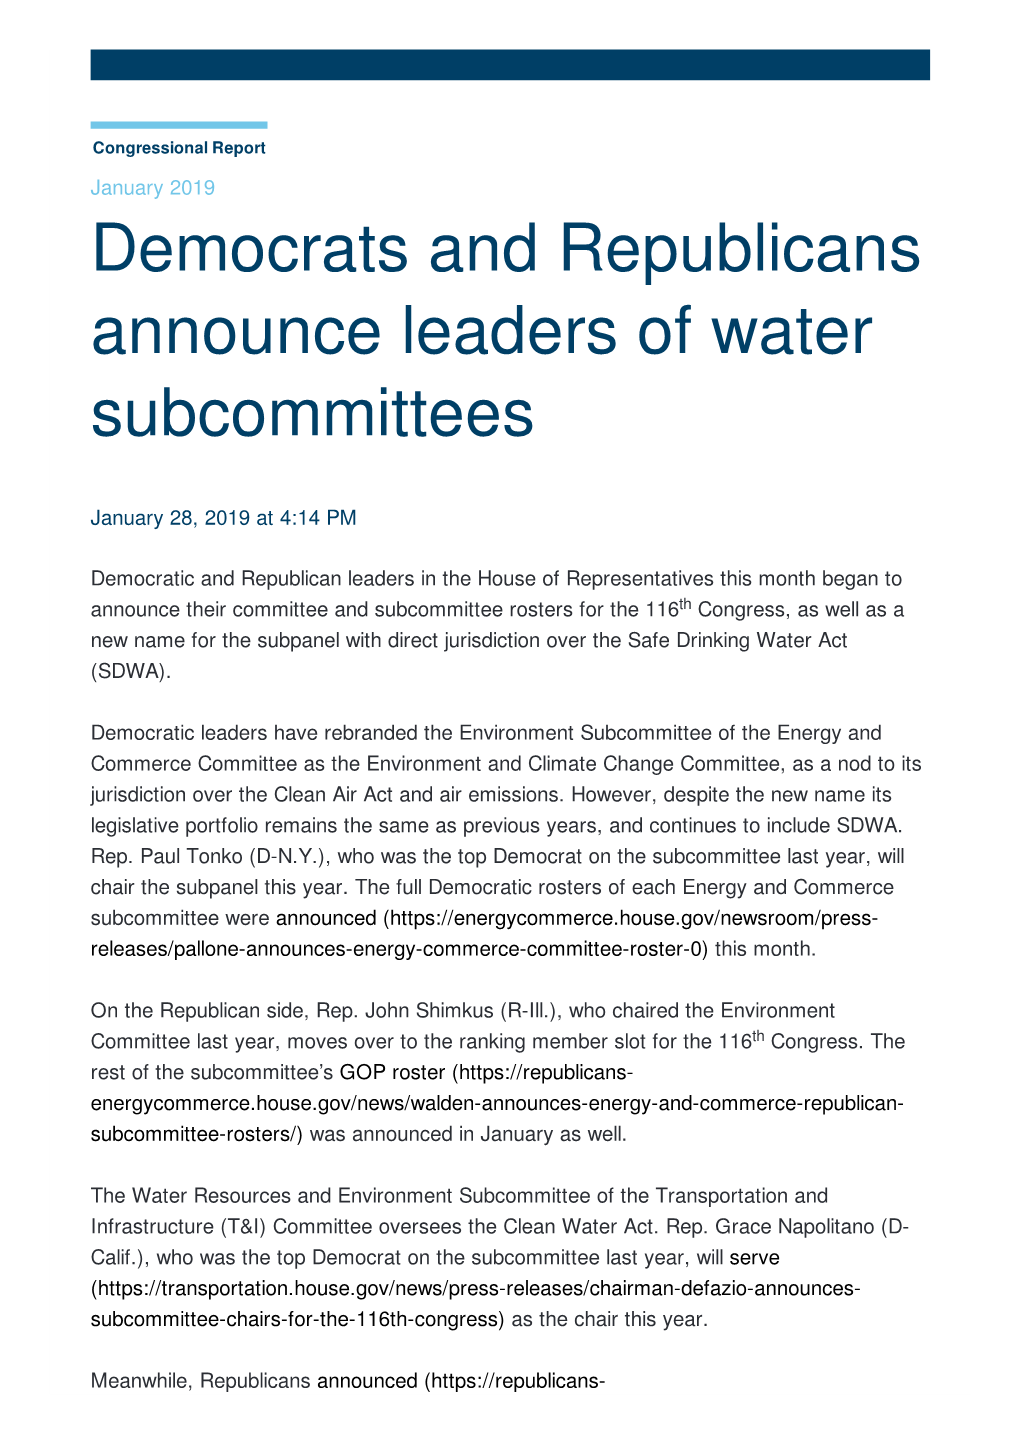 Democrats and Republicans Announce Leaders of Water Subcommittees